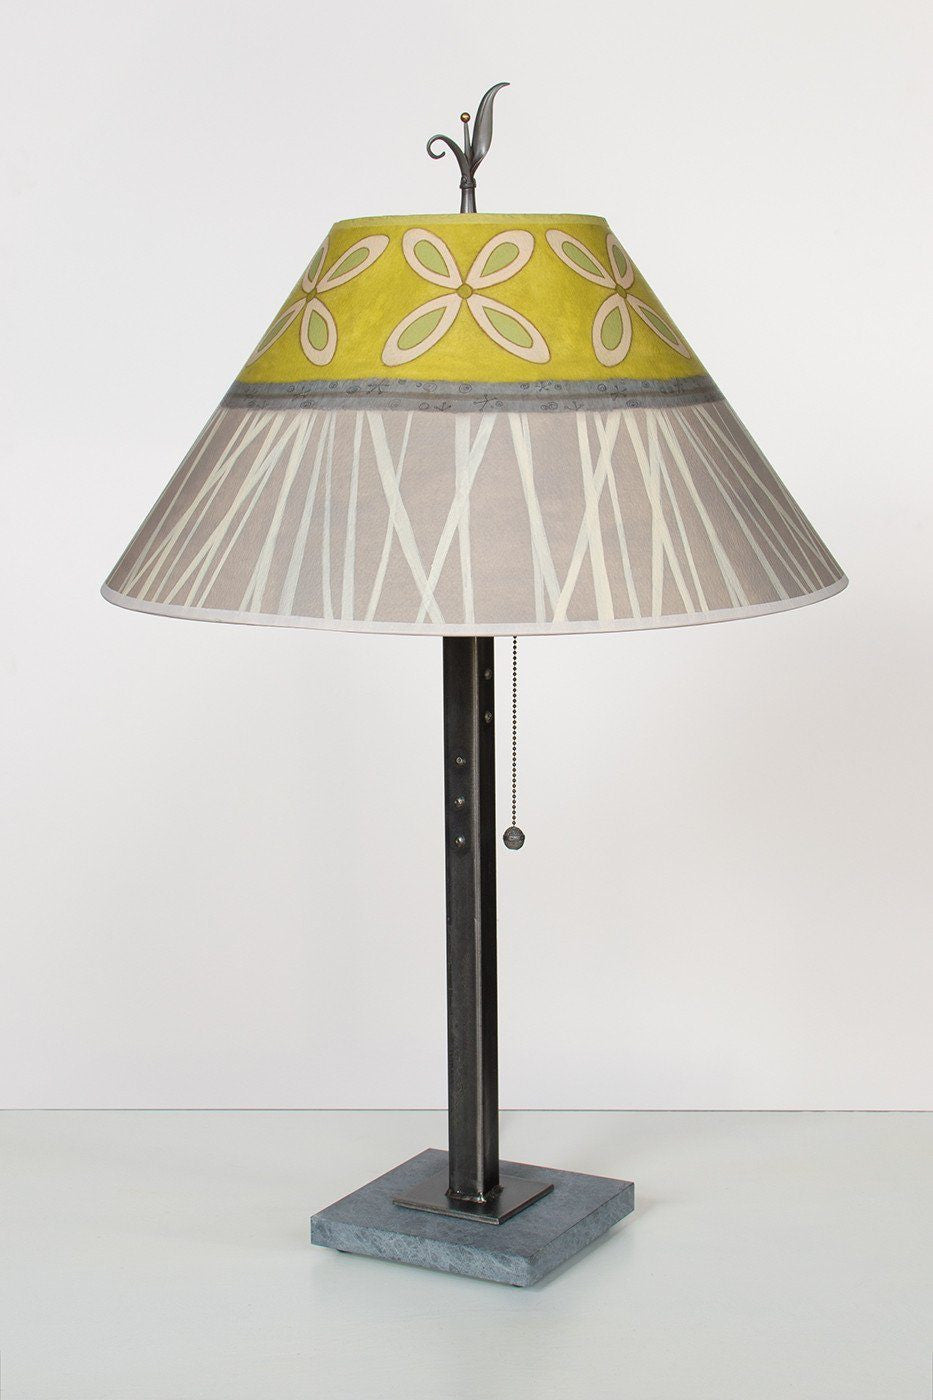 Steel Table Lamp on Italian Marble with Large Conical Shade in Kiwi